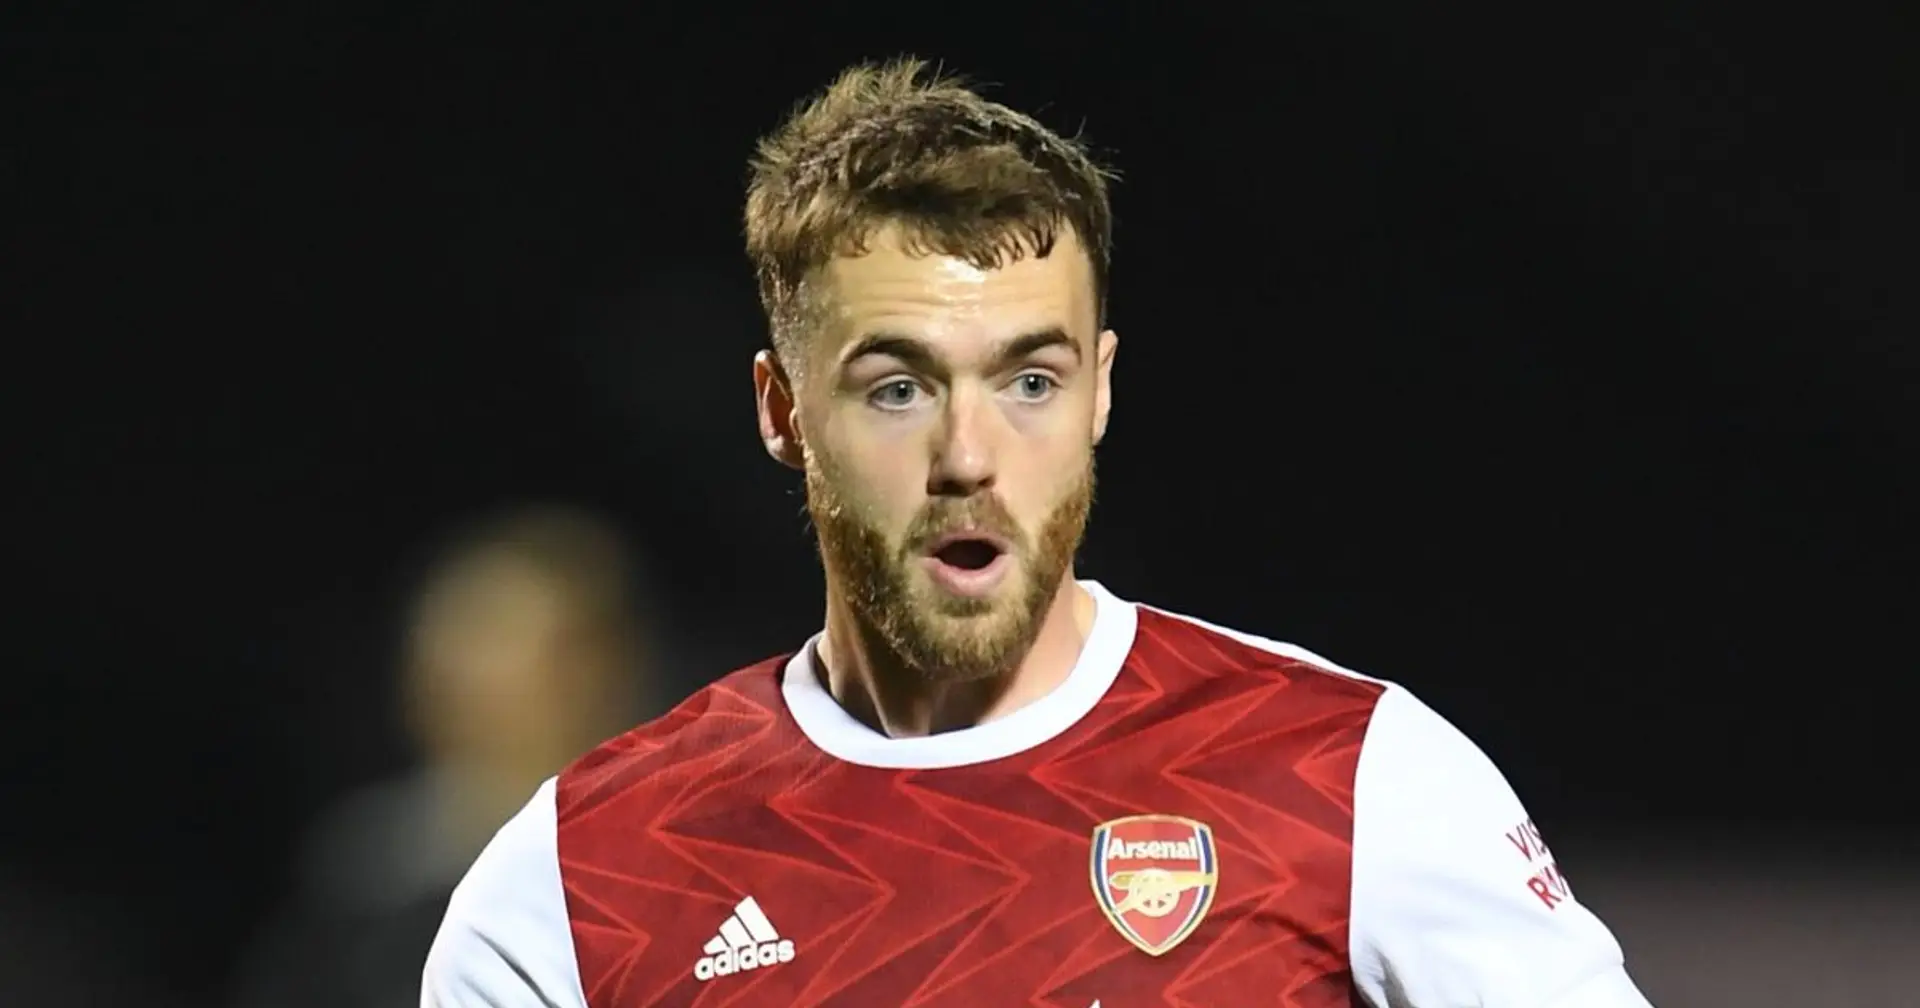 'He's never a liability': Arsenal fans debate what should be next for Calum Chambers